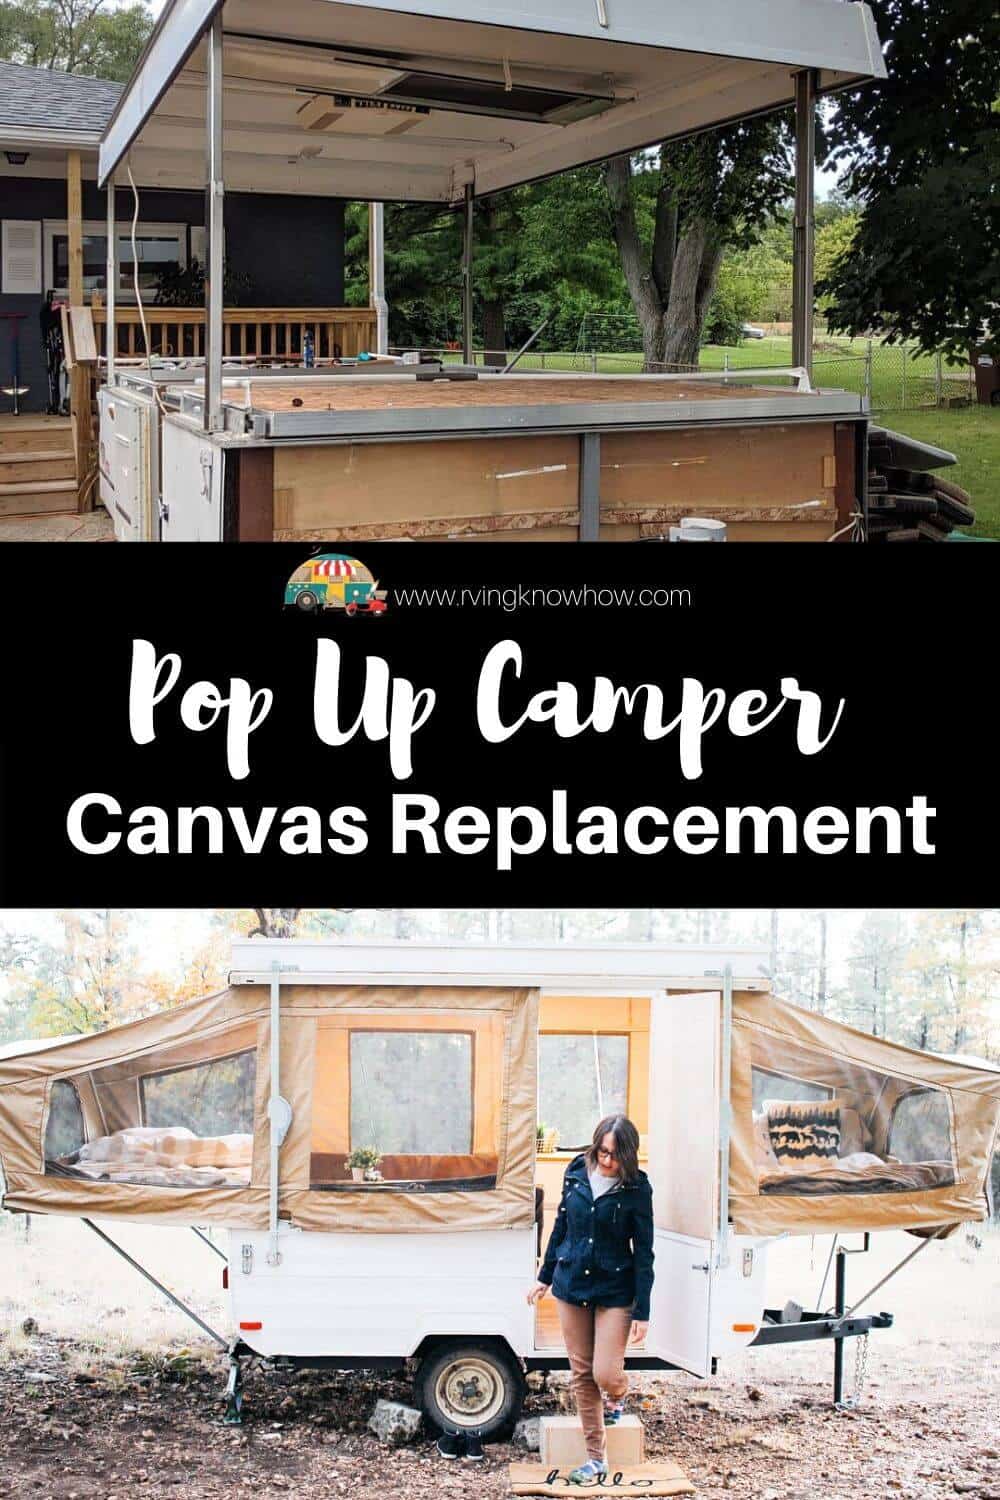 How Much Does It Cost To Replace A Pop Up Camper Canvas_